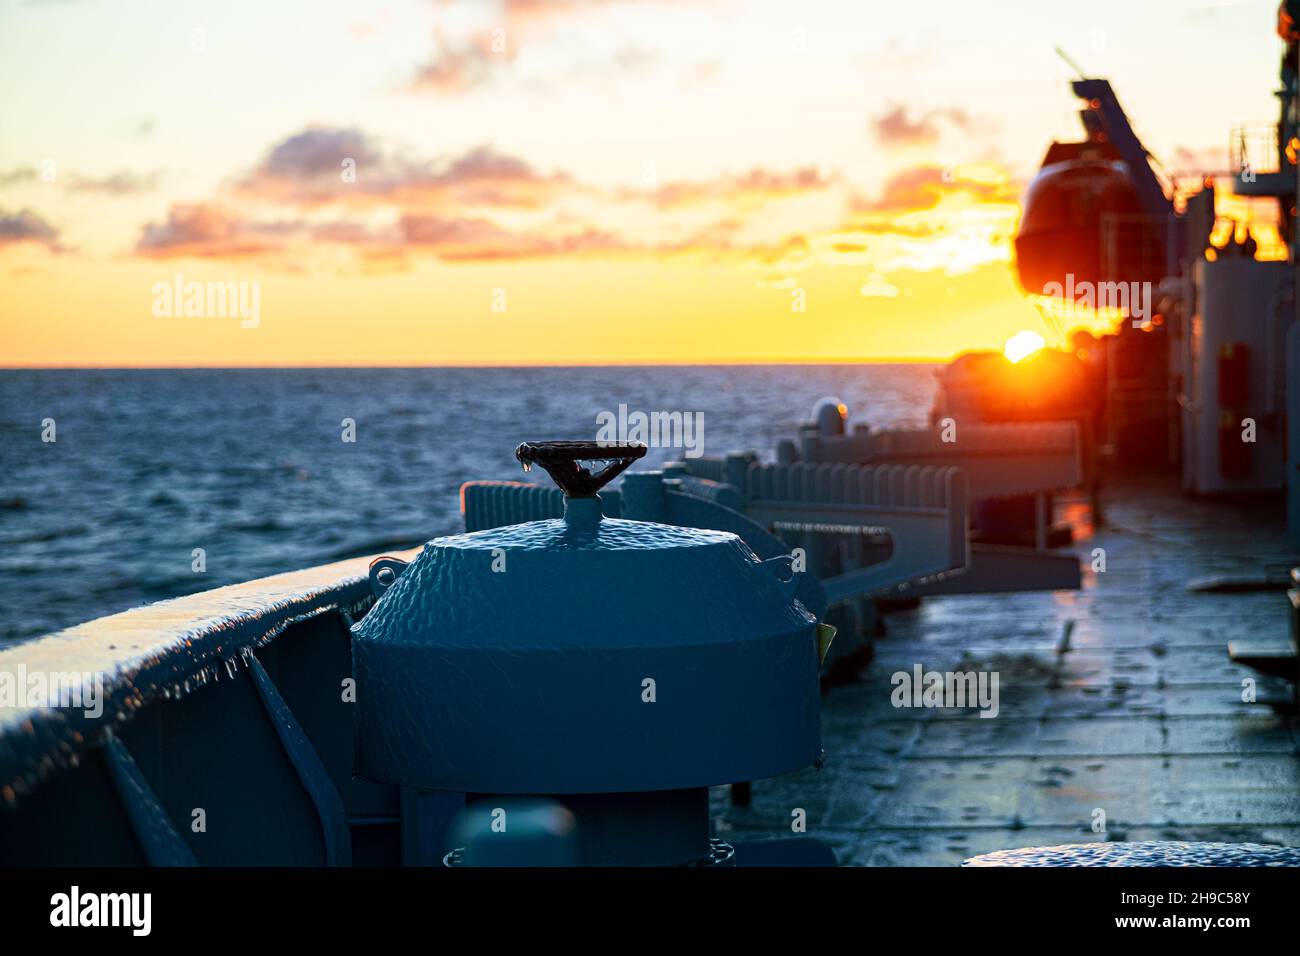 Arctic climate, details of the ventilation box at the side of the ship, covered with an ice crust, against the background of a colorful rising sun Stock Photo